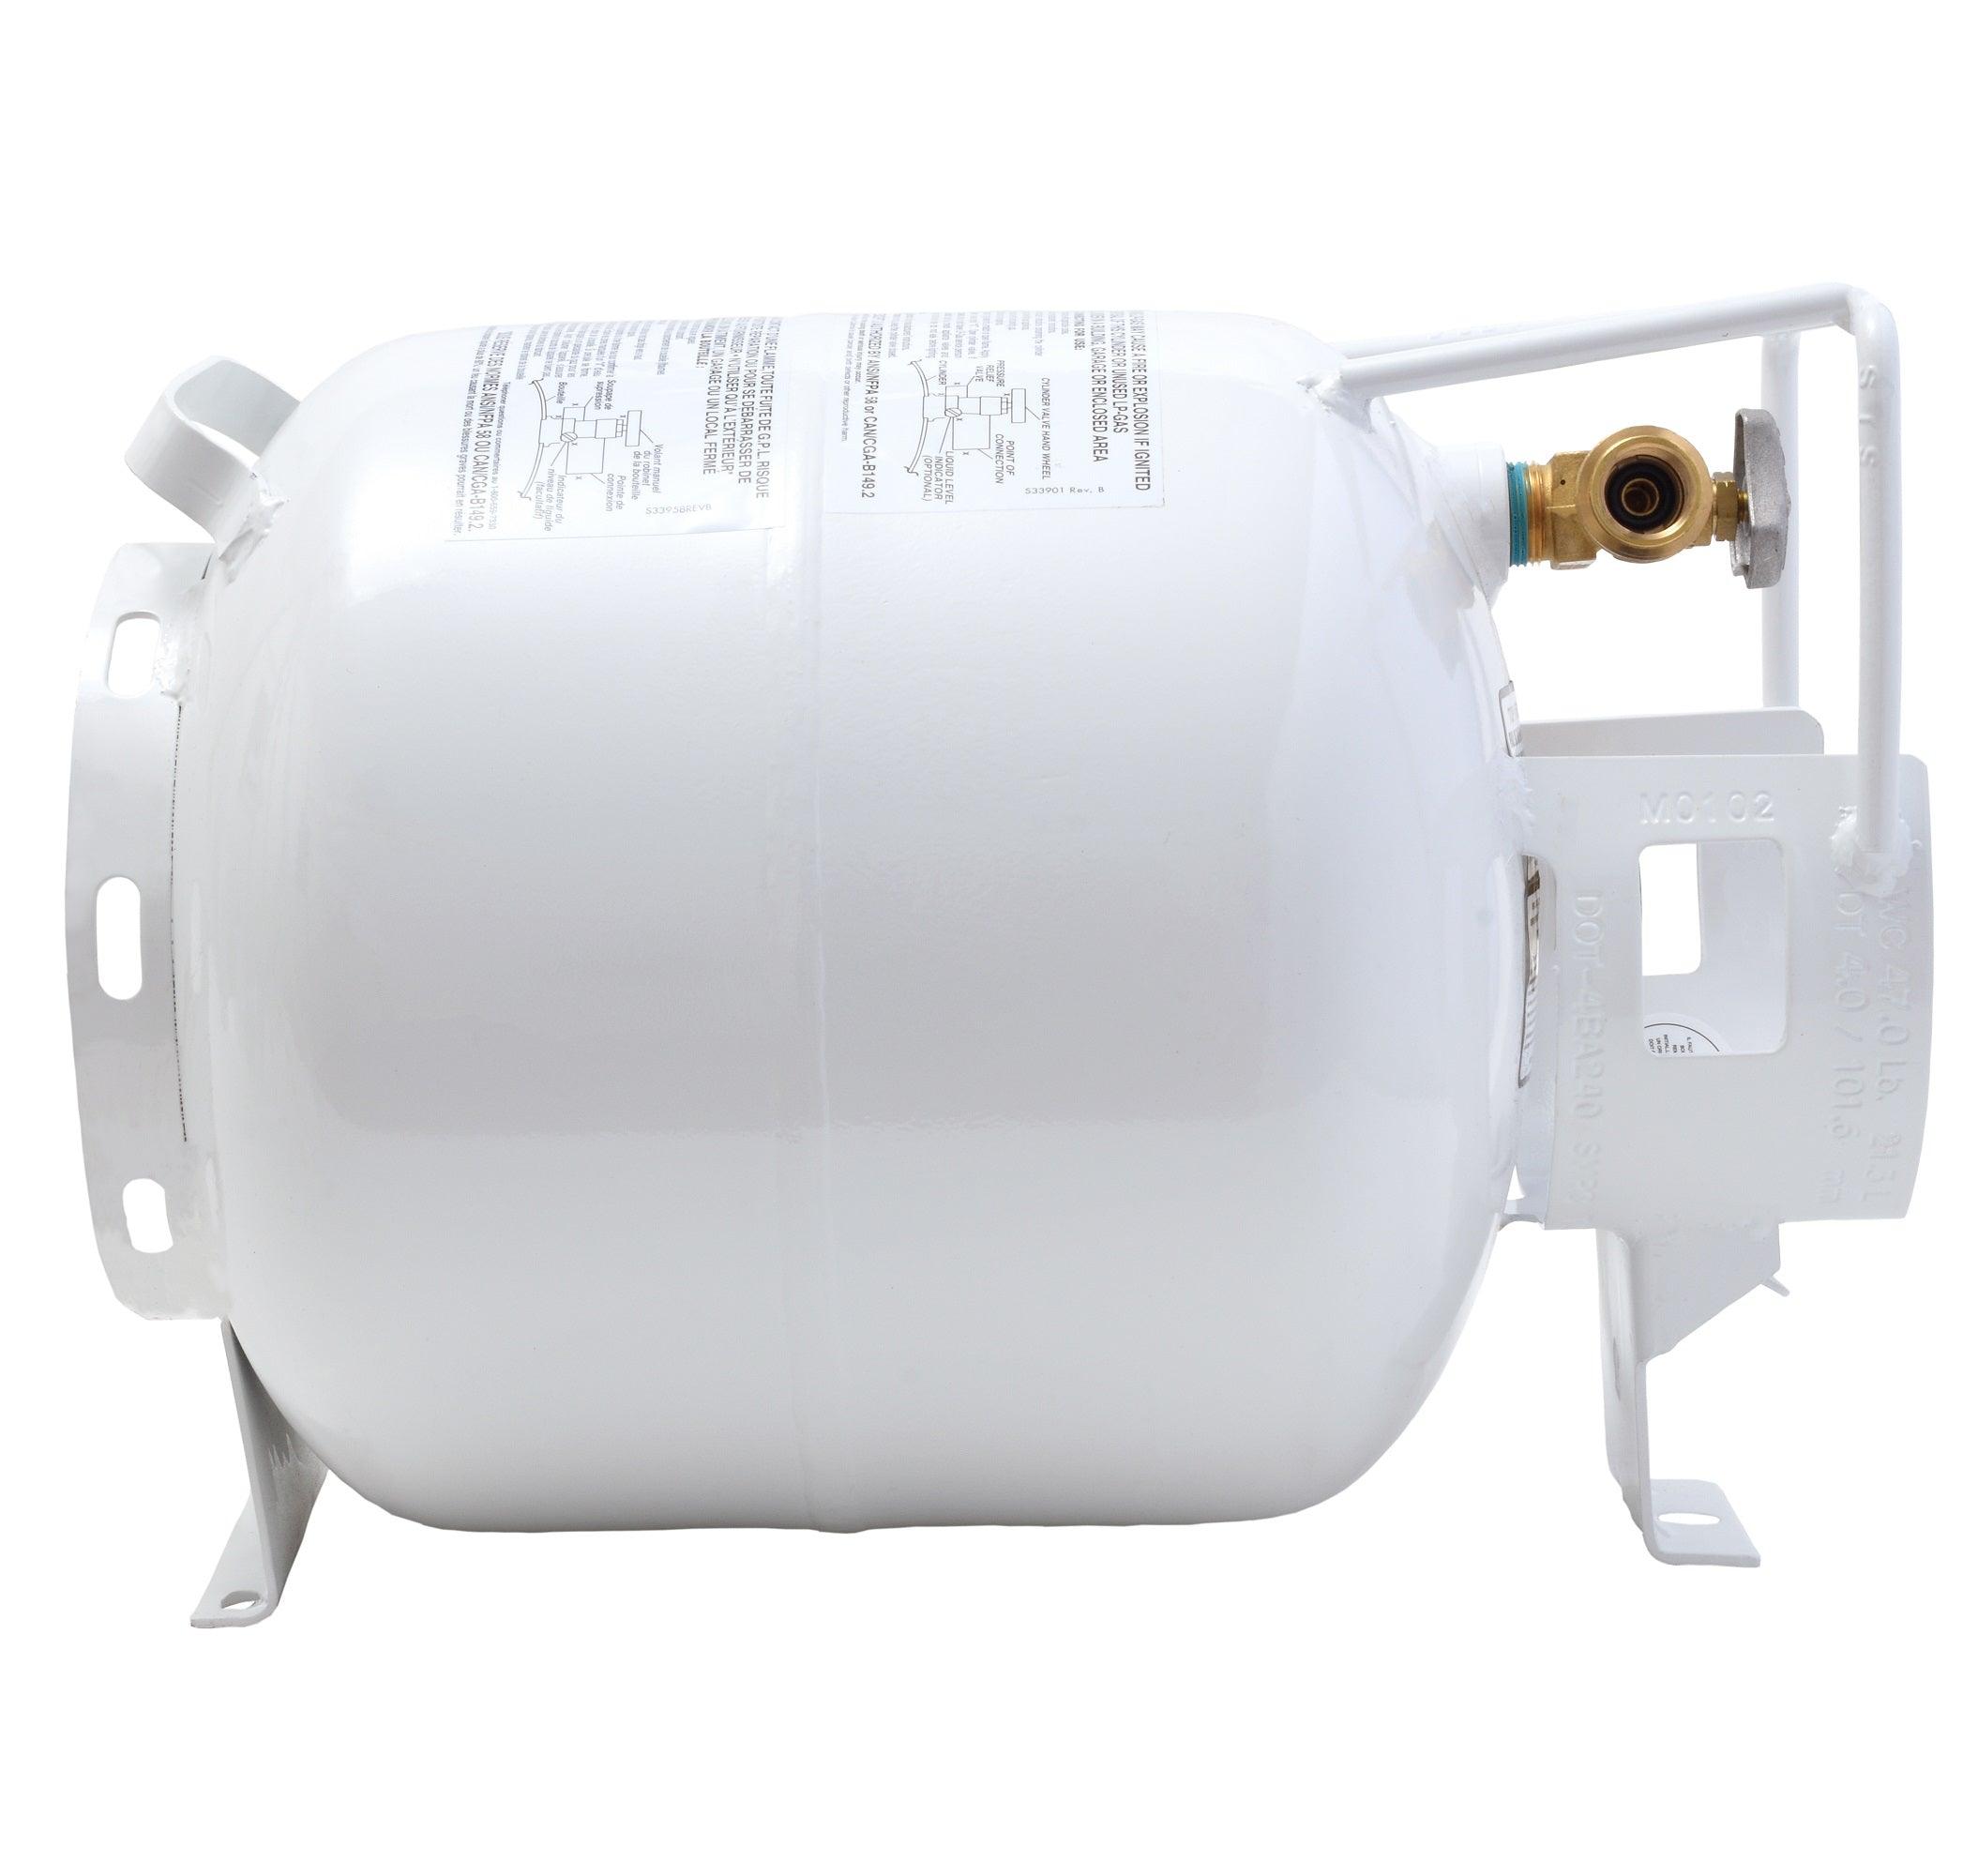 Flame King 20lb Horizontal Propane Cylinder Tank With Valve and Gauge Rv Trailer - Flame King